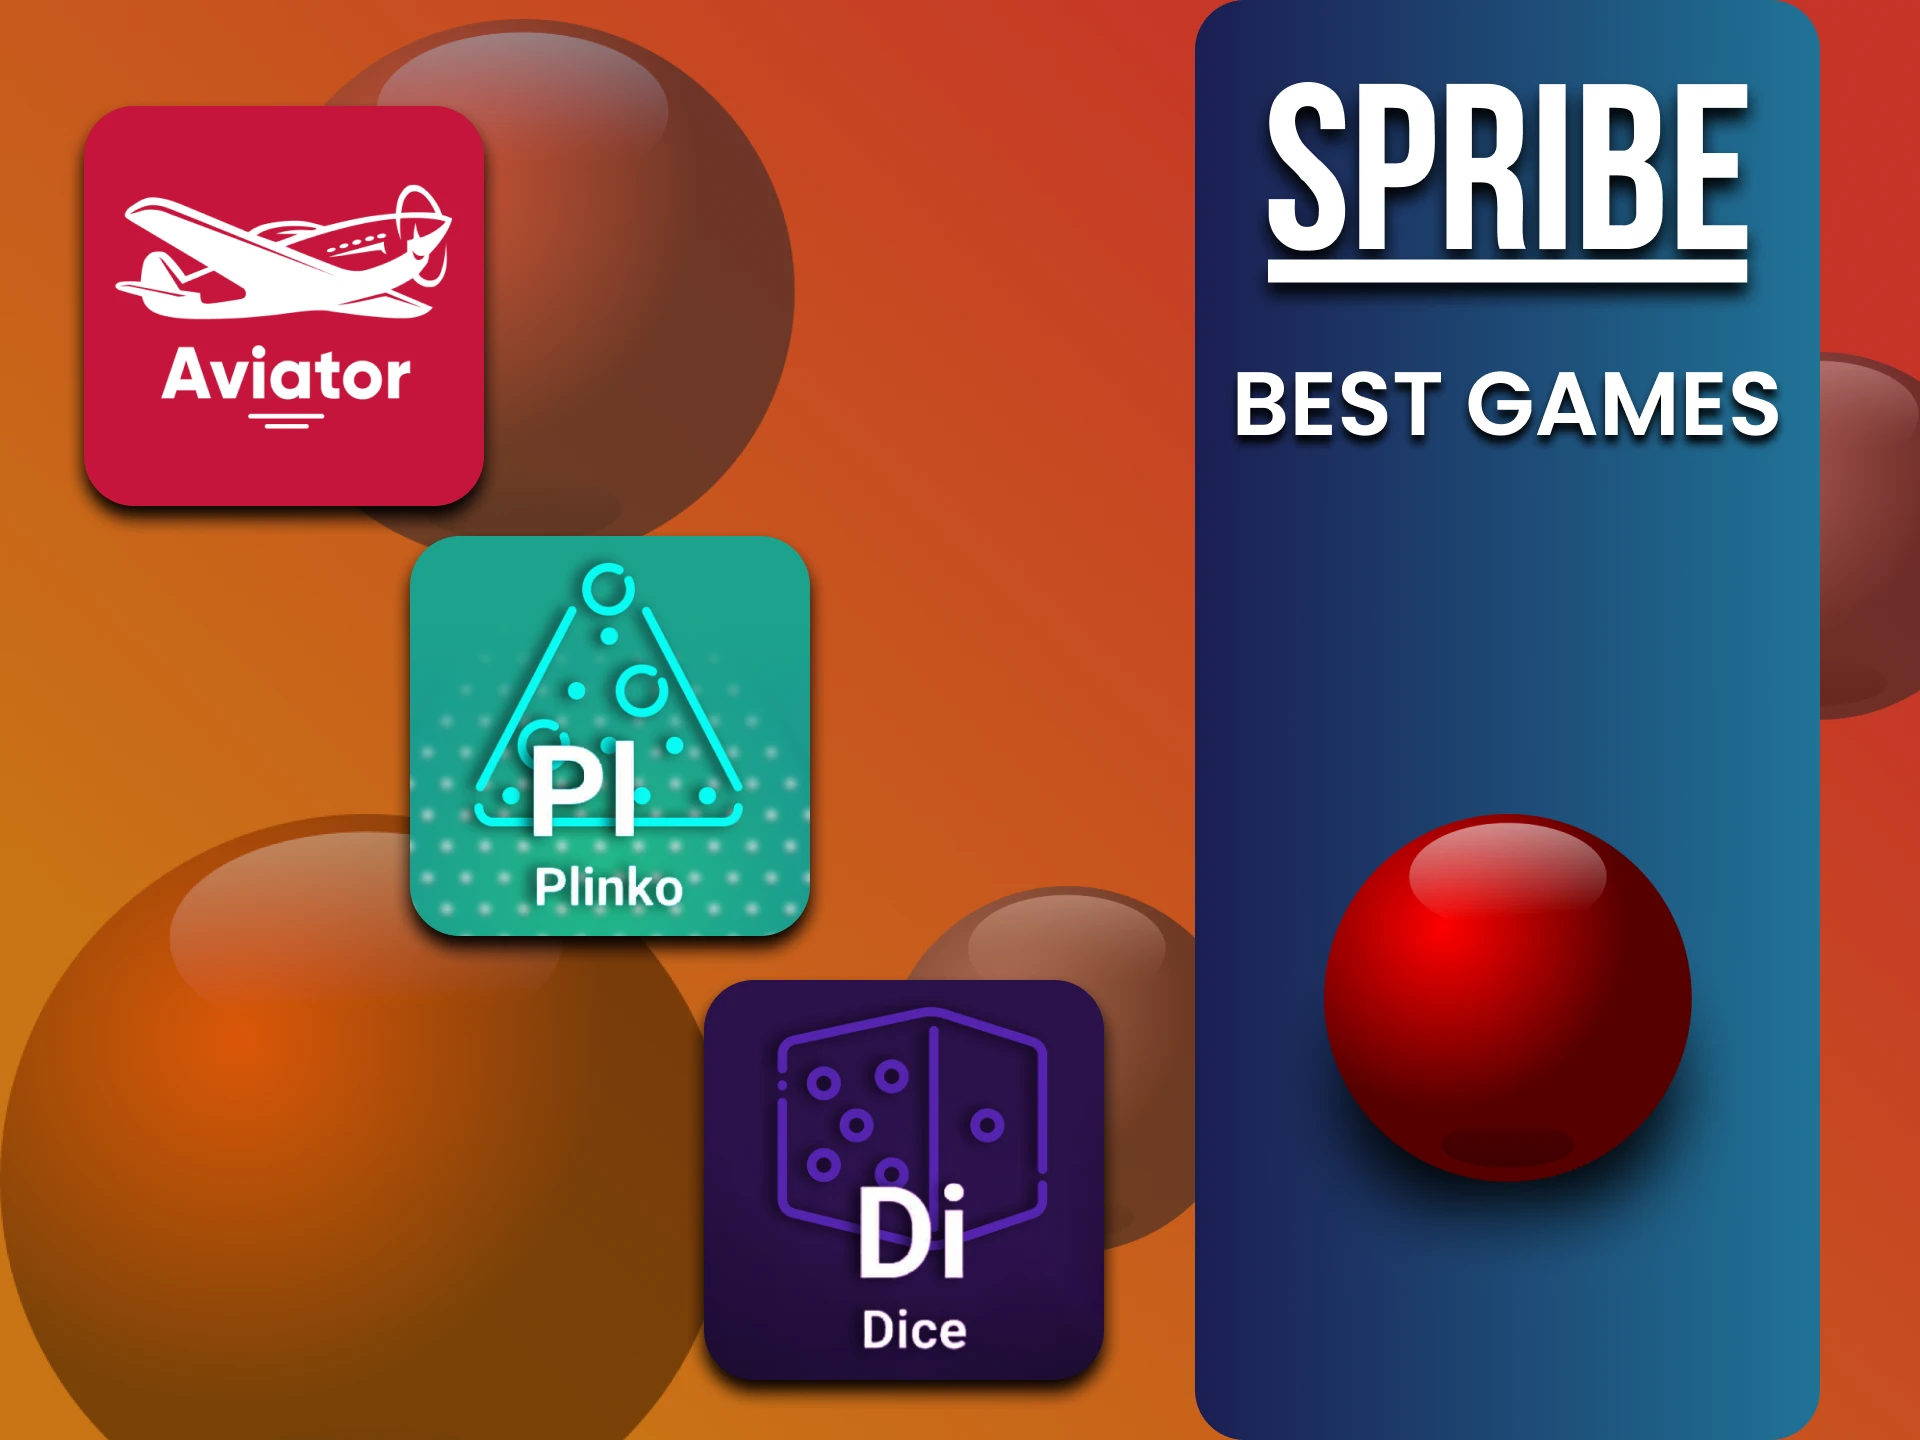 Play the best games from Spribe.